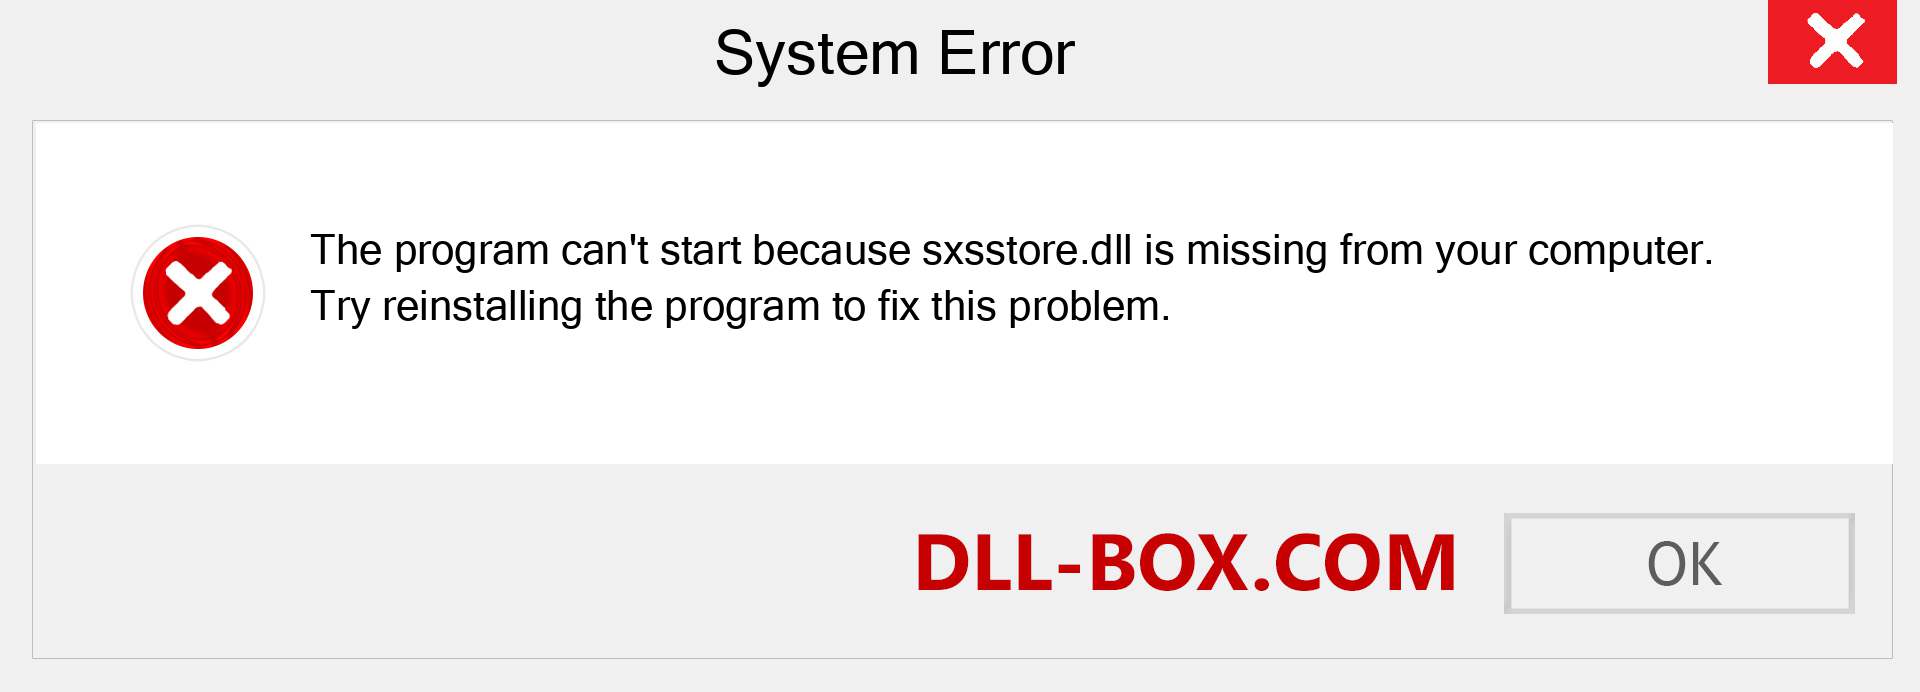  sxsstore.dll file is missing?. Download for Windows 7, 8, 10 - Fix  sxsstore dll Missing Error on Windows, photos, images